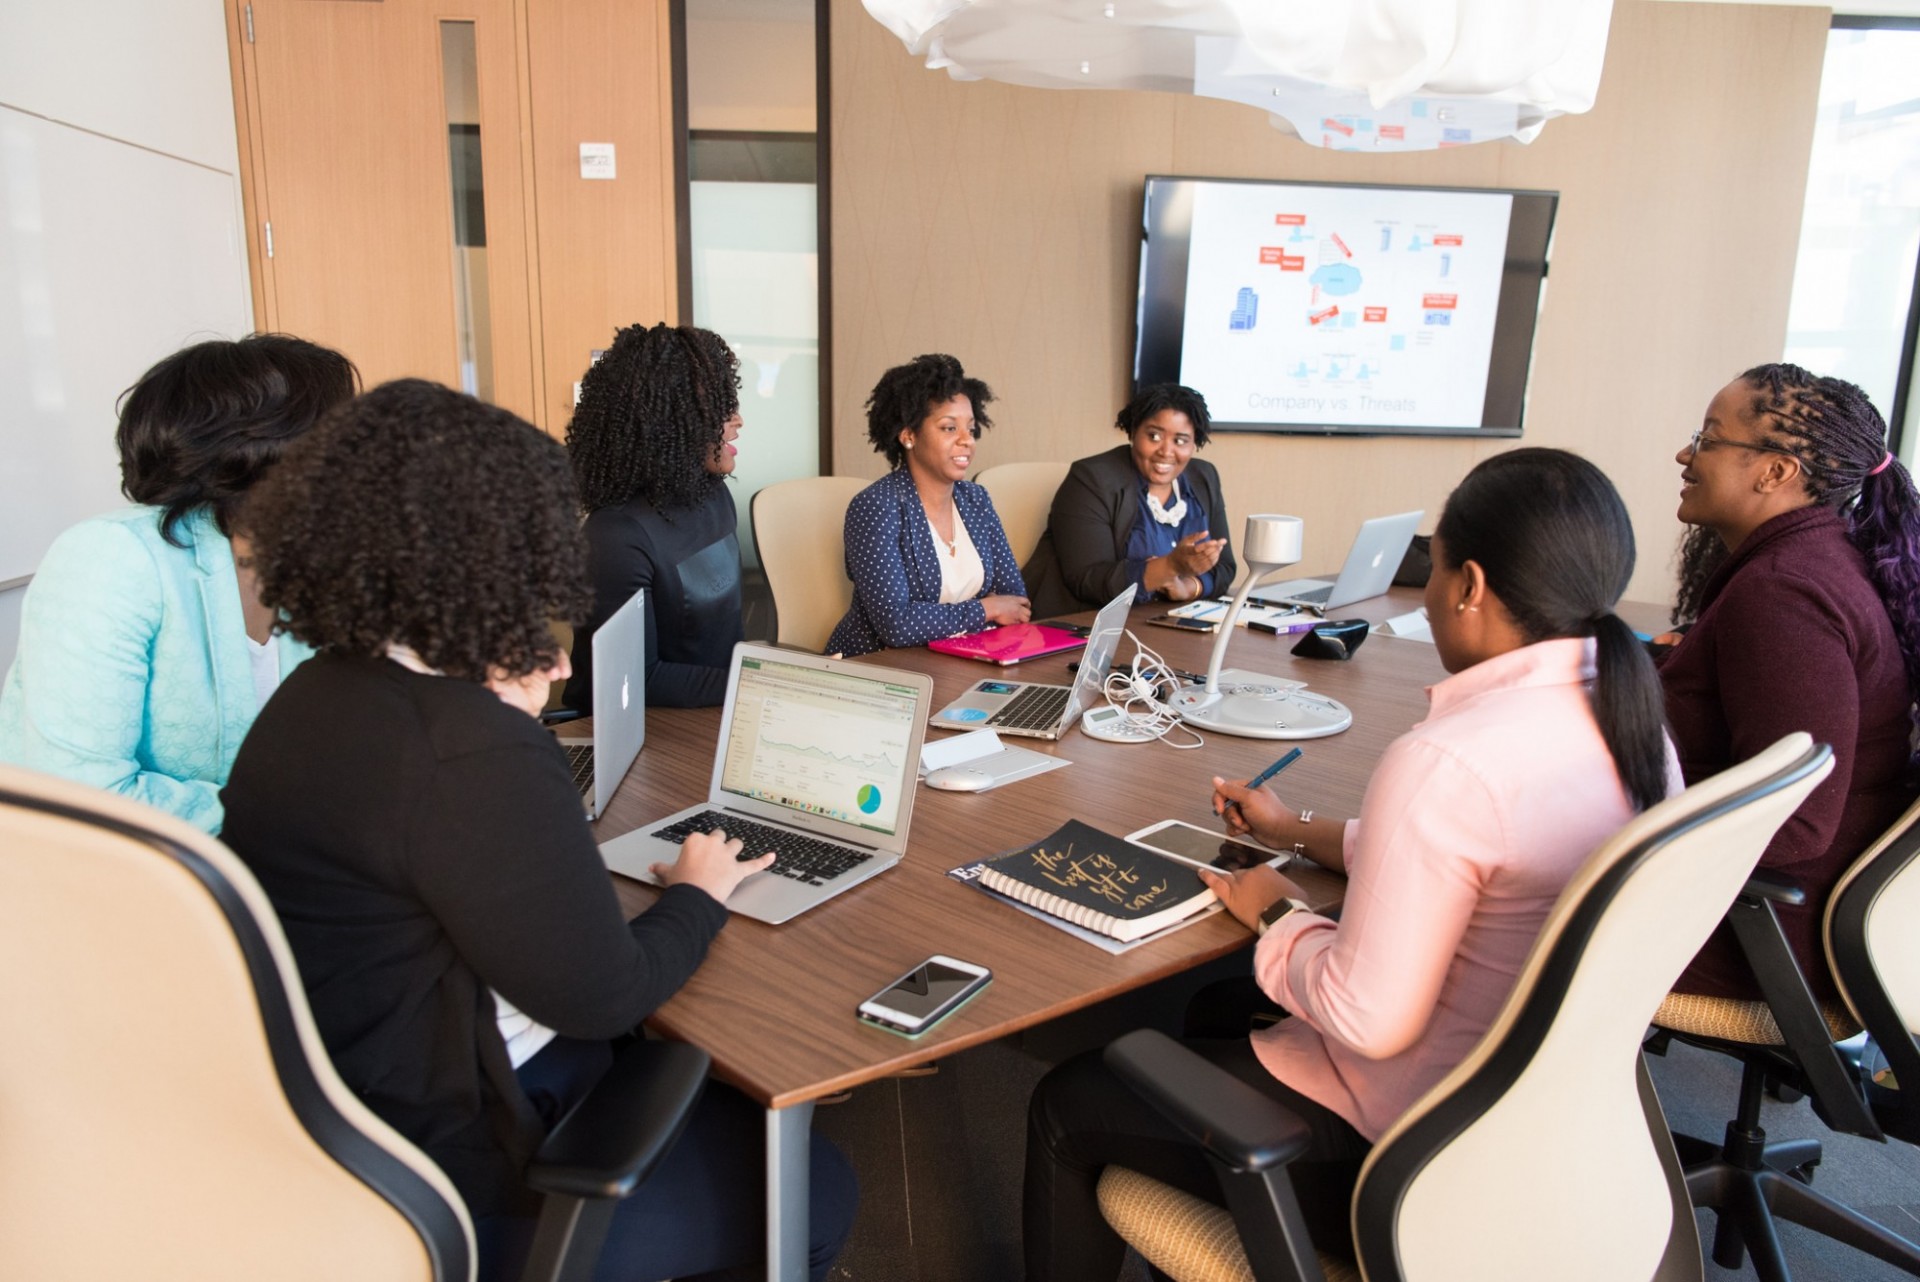 Black women meeting at a board table and having a discussion with laptops